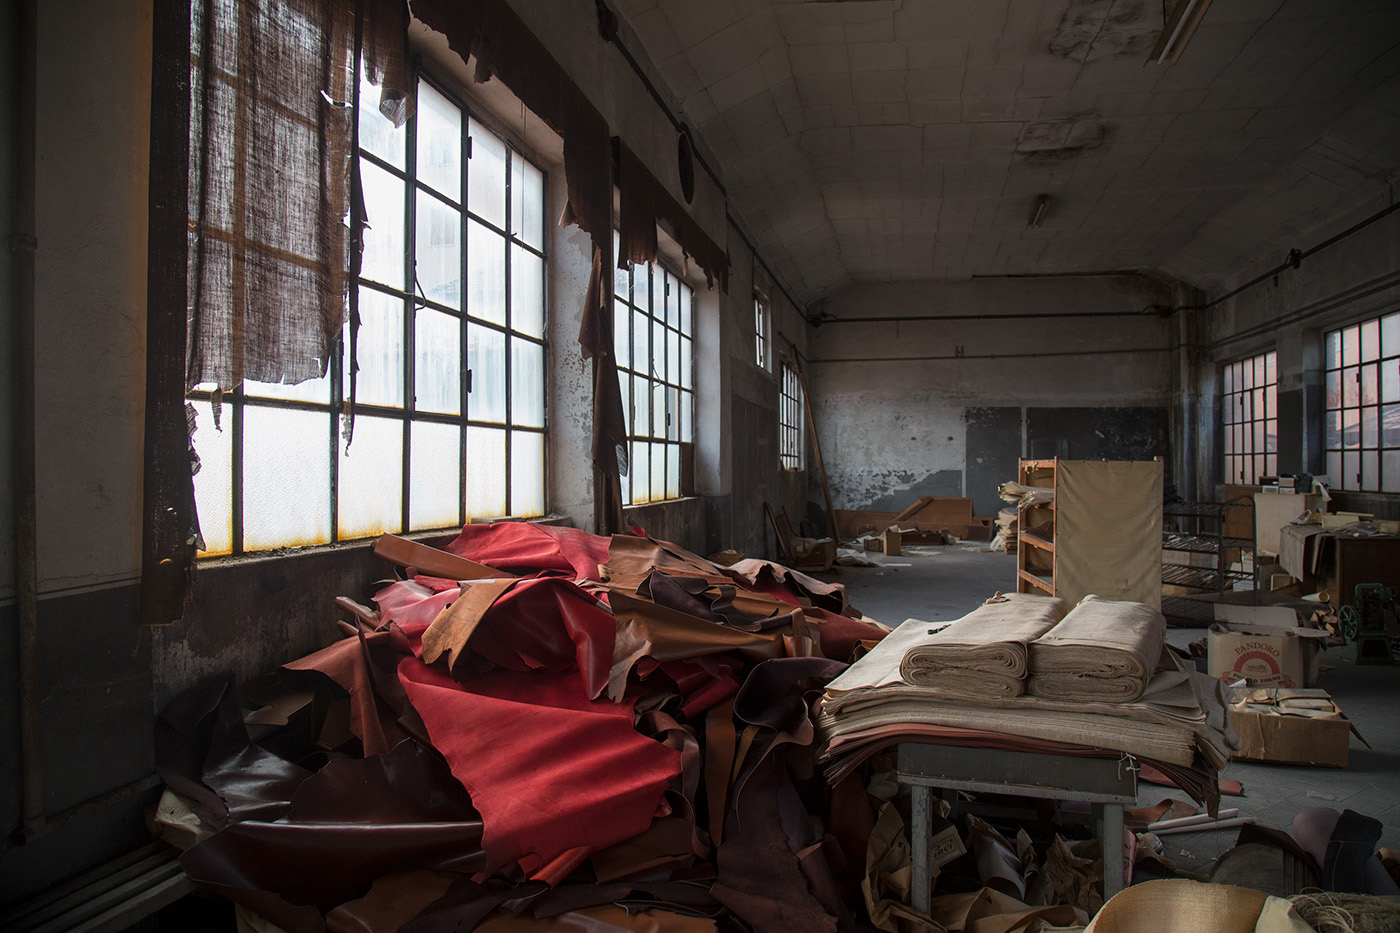 Photoreportage shoes factory closed abandoned activity dismissed place shoes Work 